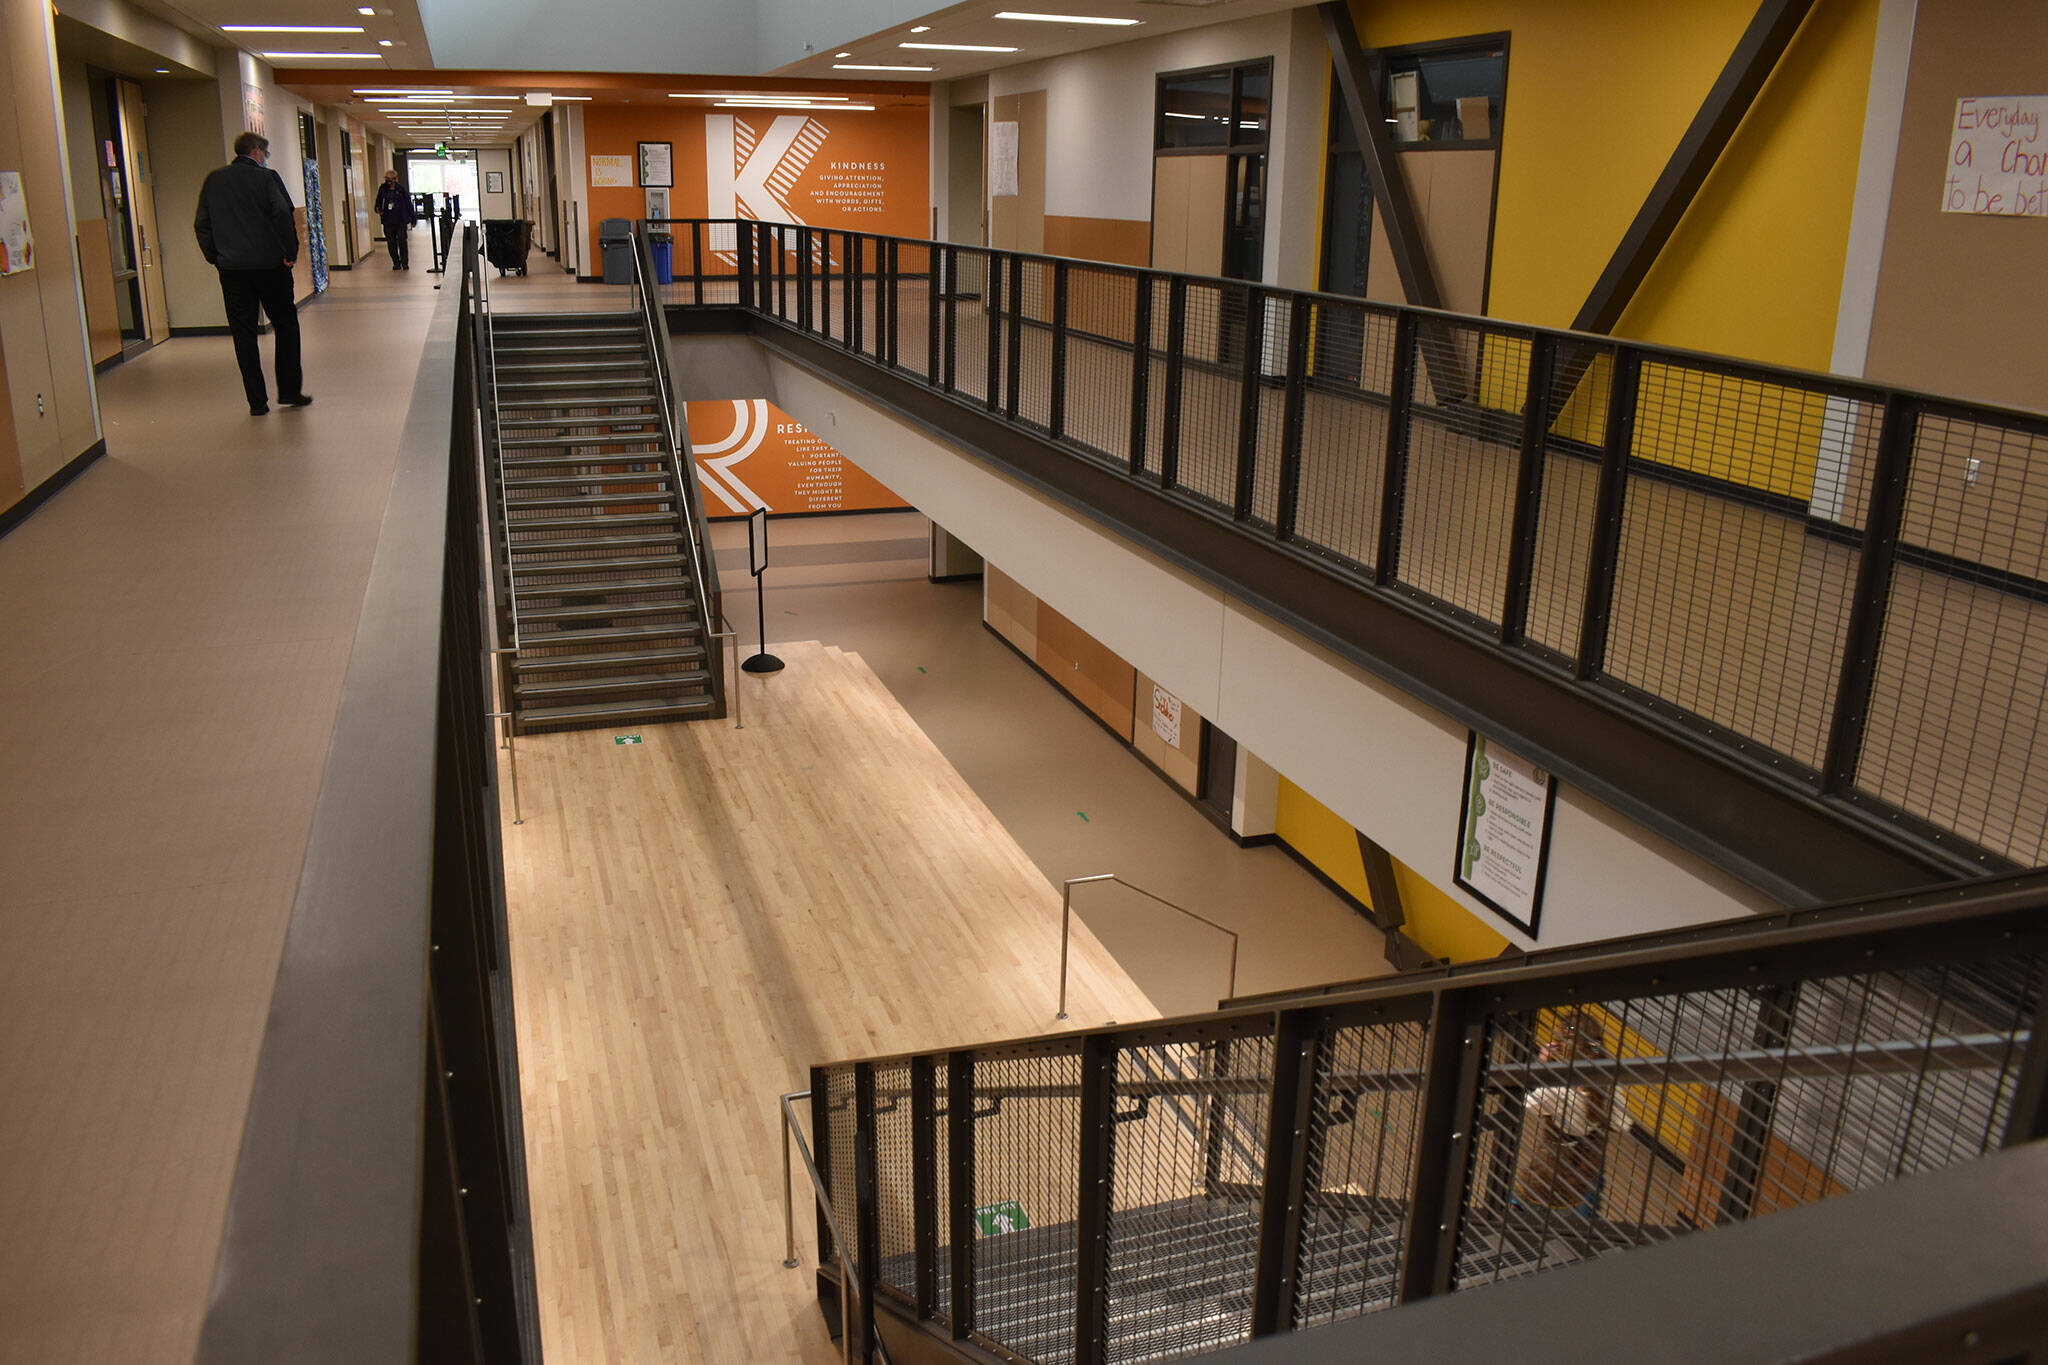 A common space on the south side of Glacier Middle School is flanked by two sets of stairs leading to the second floor. The unusual looking area is designed that way to encourage creative interactions between students, assistant superintendent Scott Harrison said, rather than simply ferry them from one class to the next.